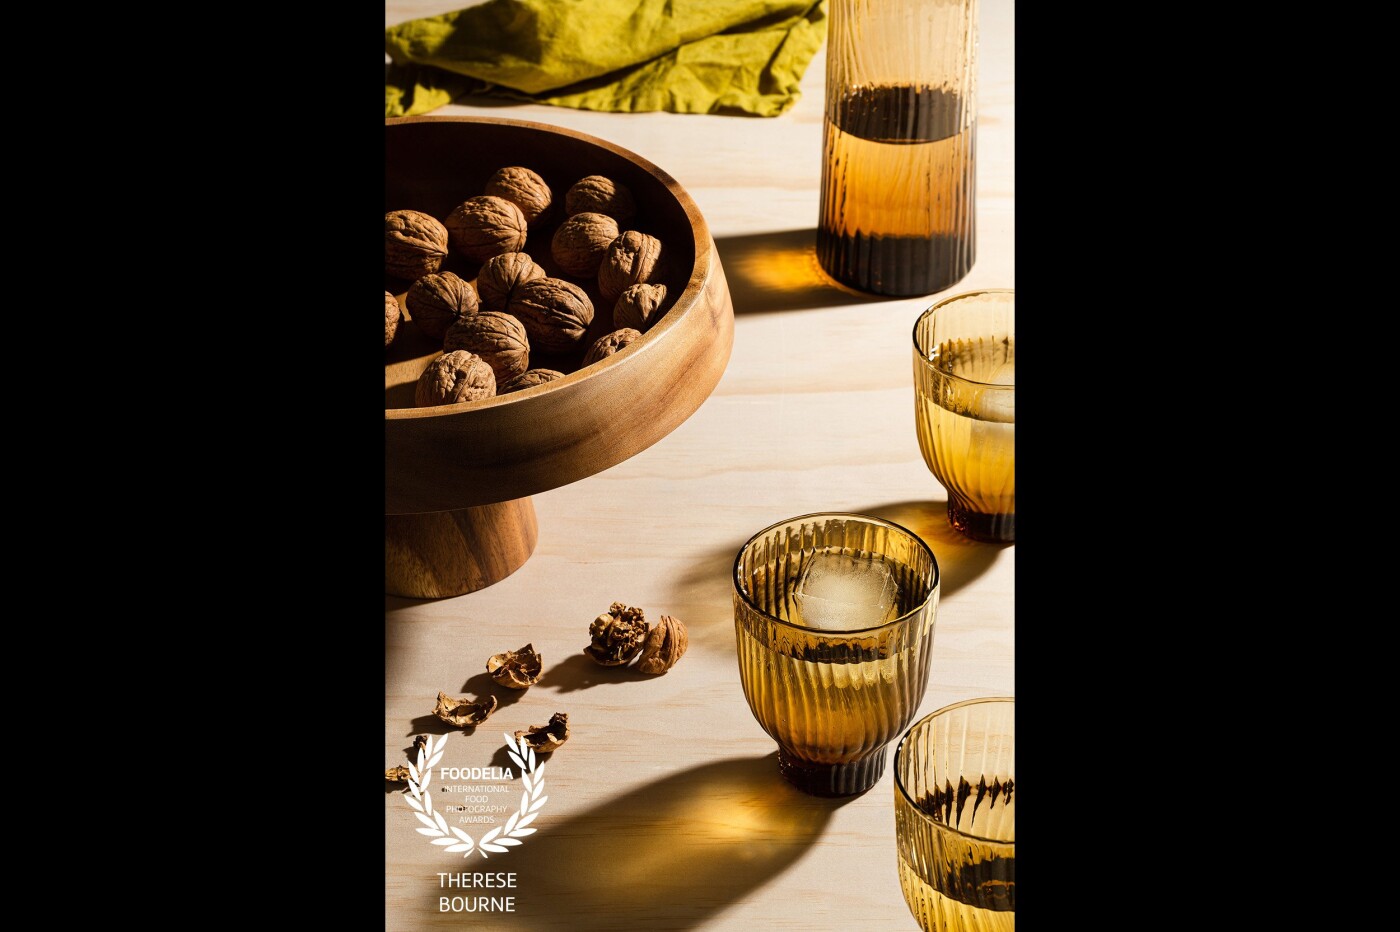 I love working with hard light and dramatic shadows. The light on the walnuts makes my heart skip a beat. I'm so lucky that my client gives me full creative license.